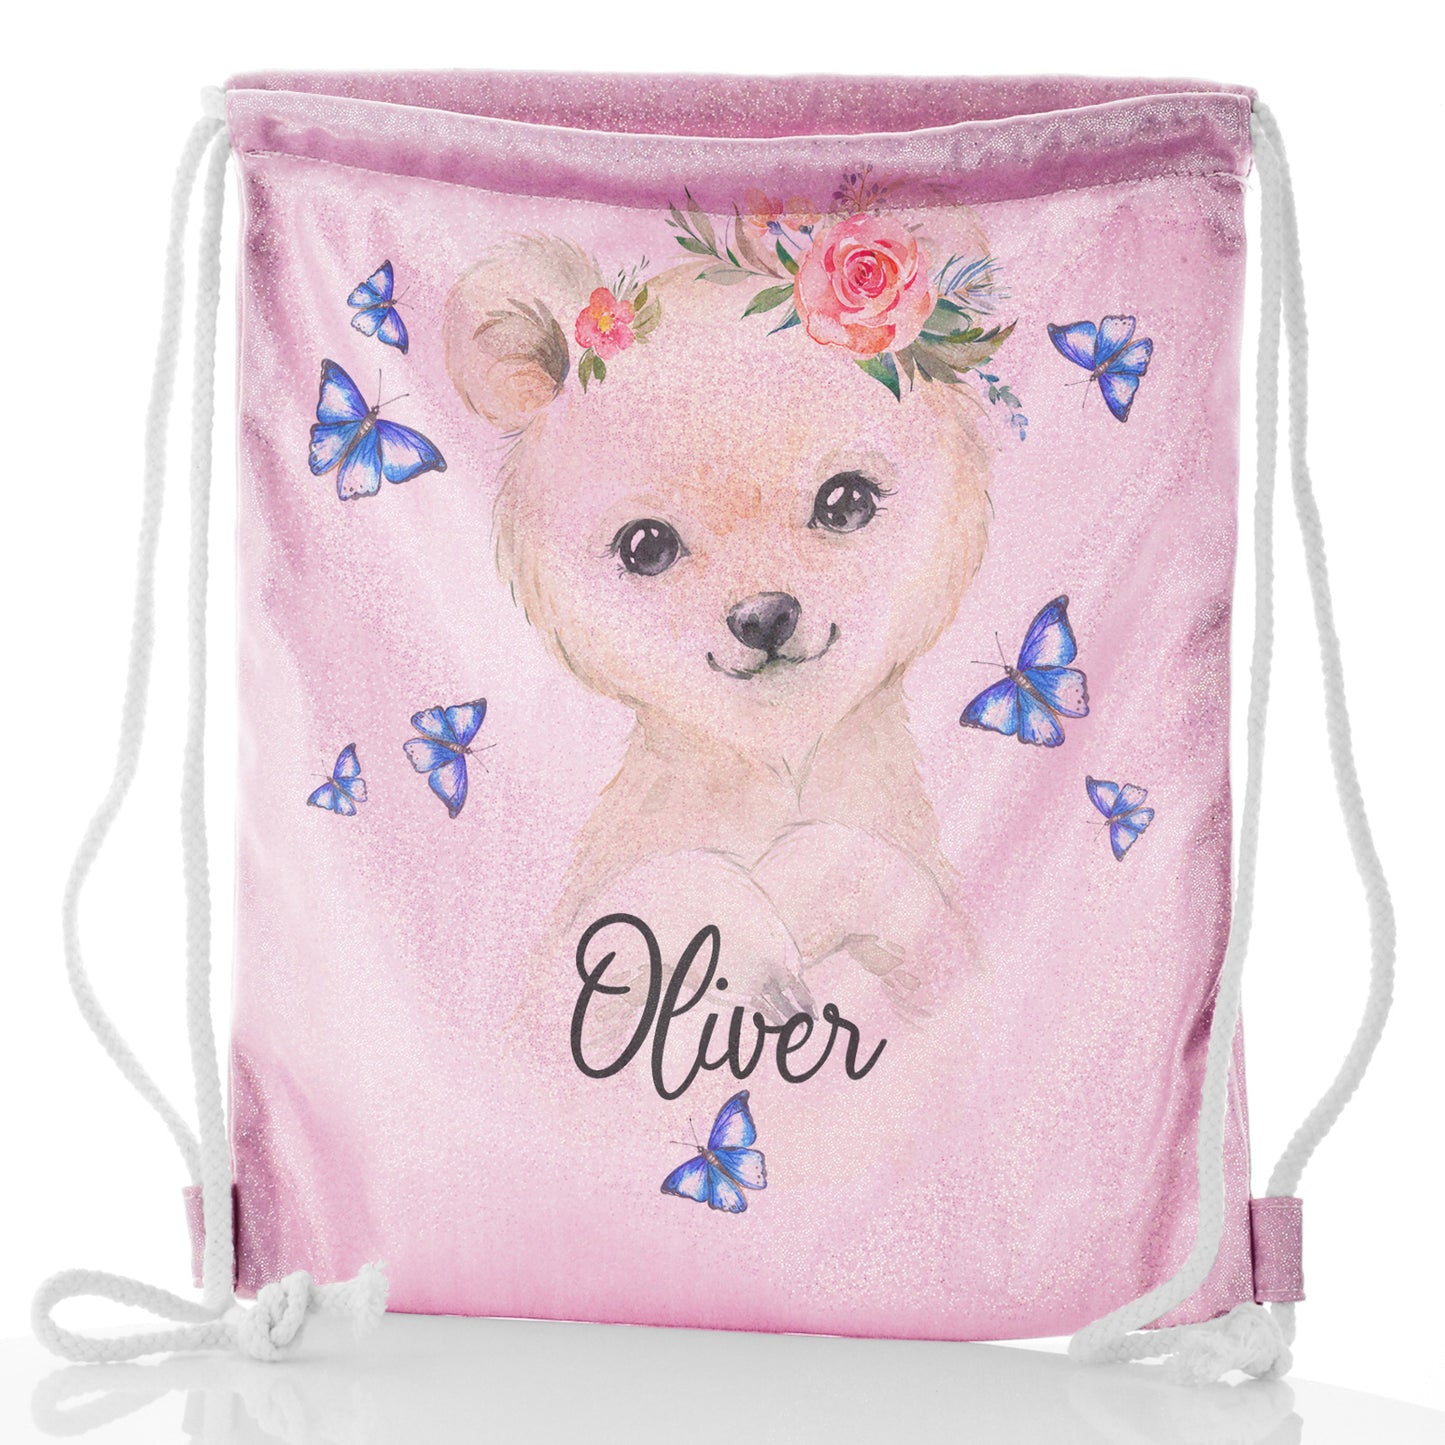 Personalised Glitter Drawstring Backpack with White Polar Bear Blue Butterflies and Cute Text